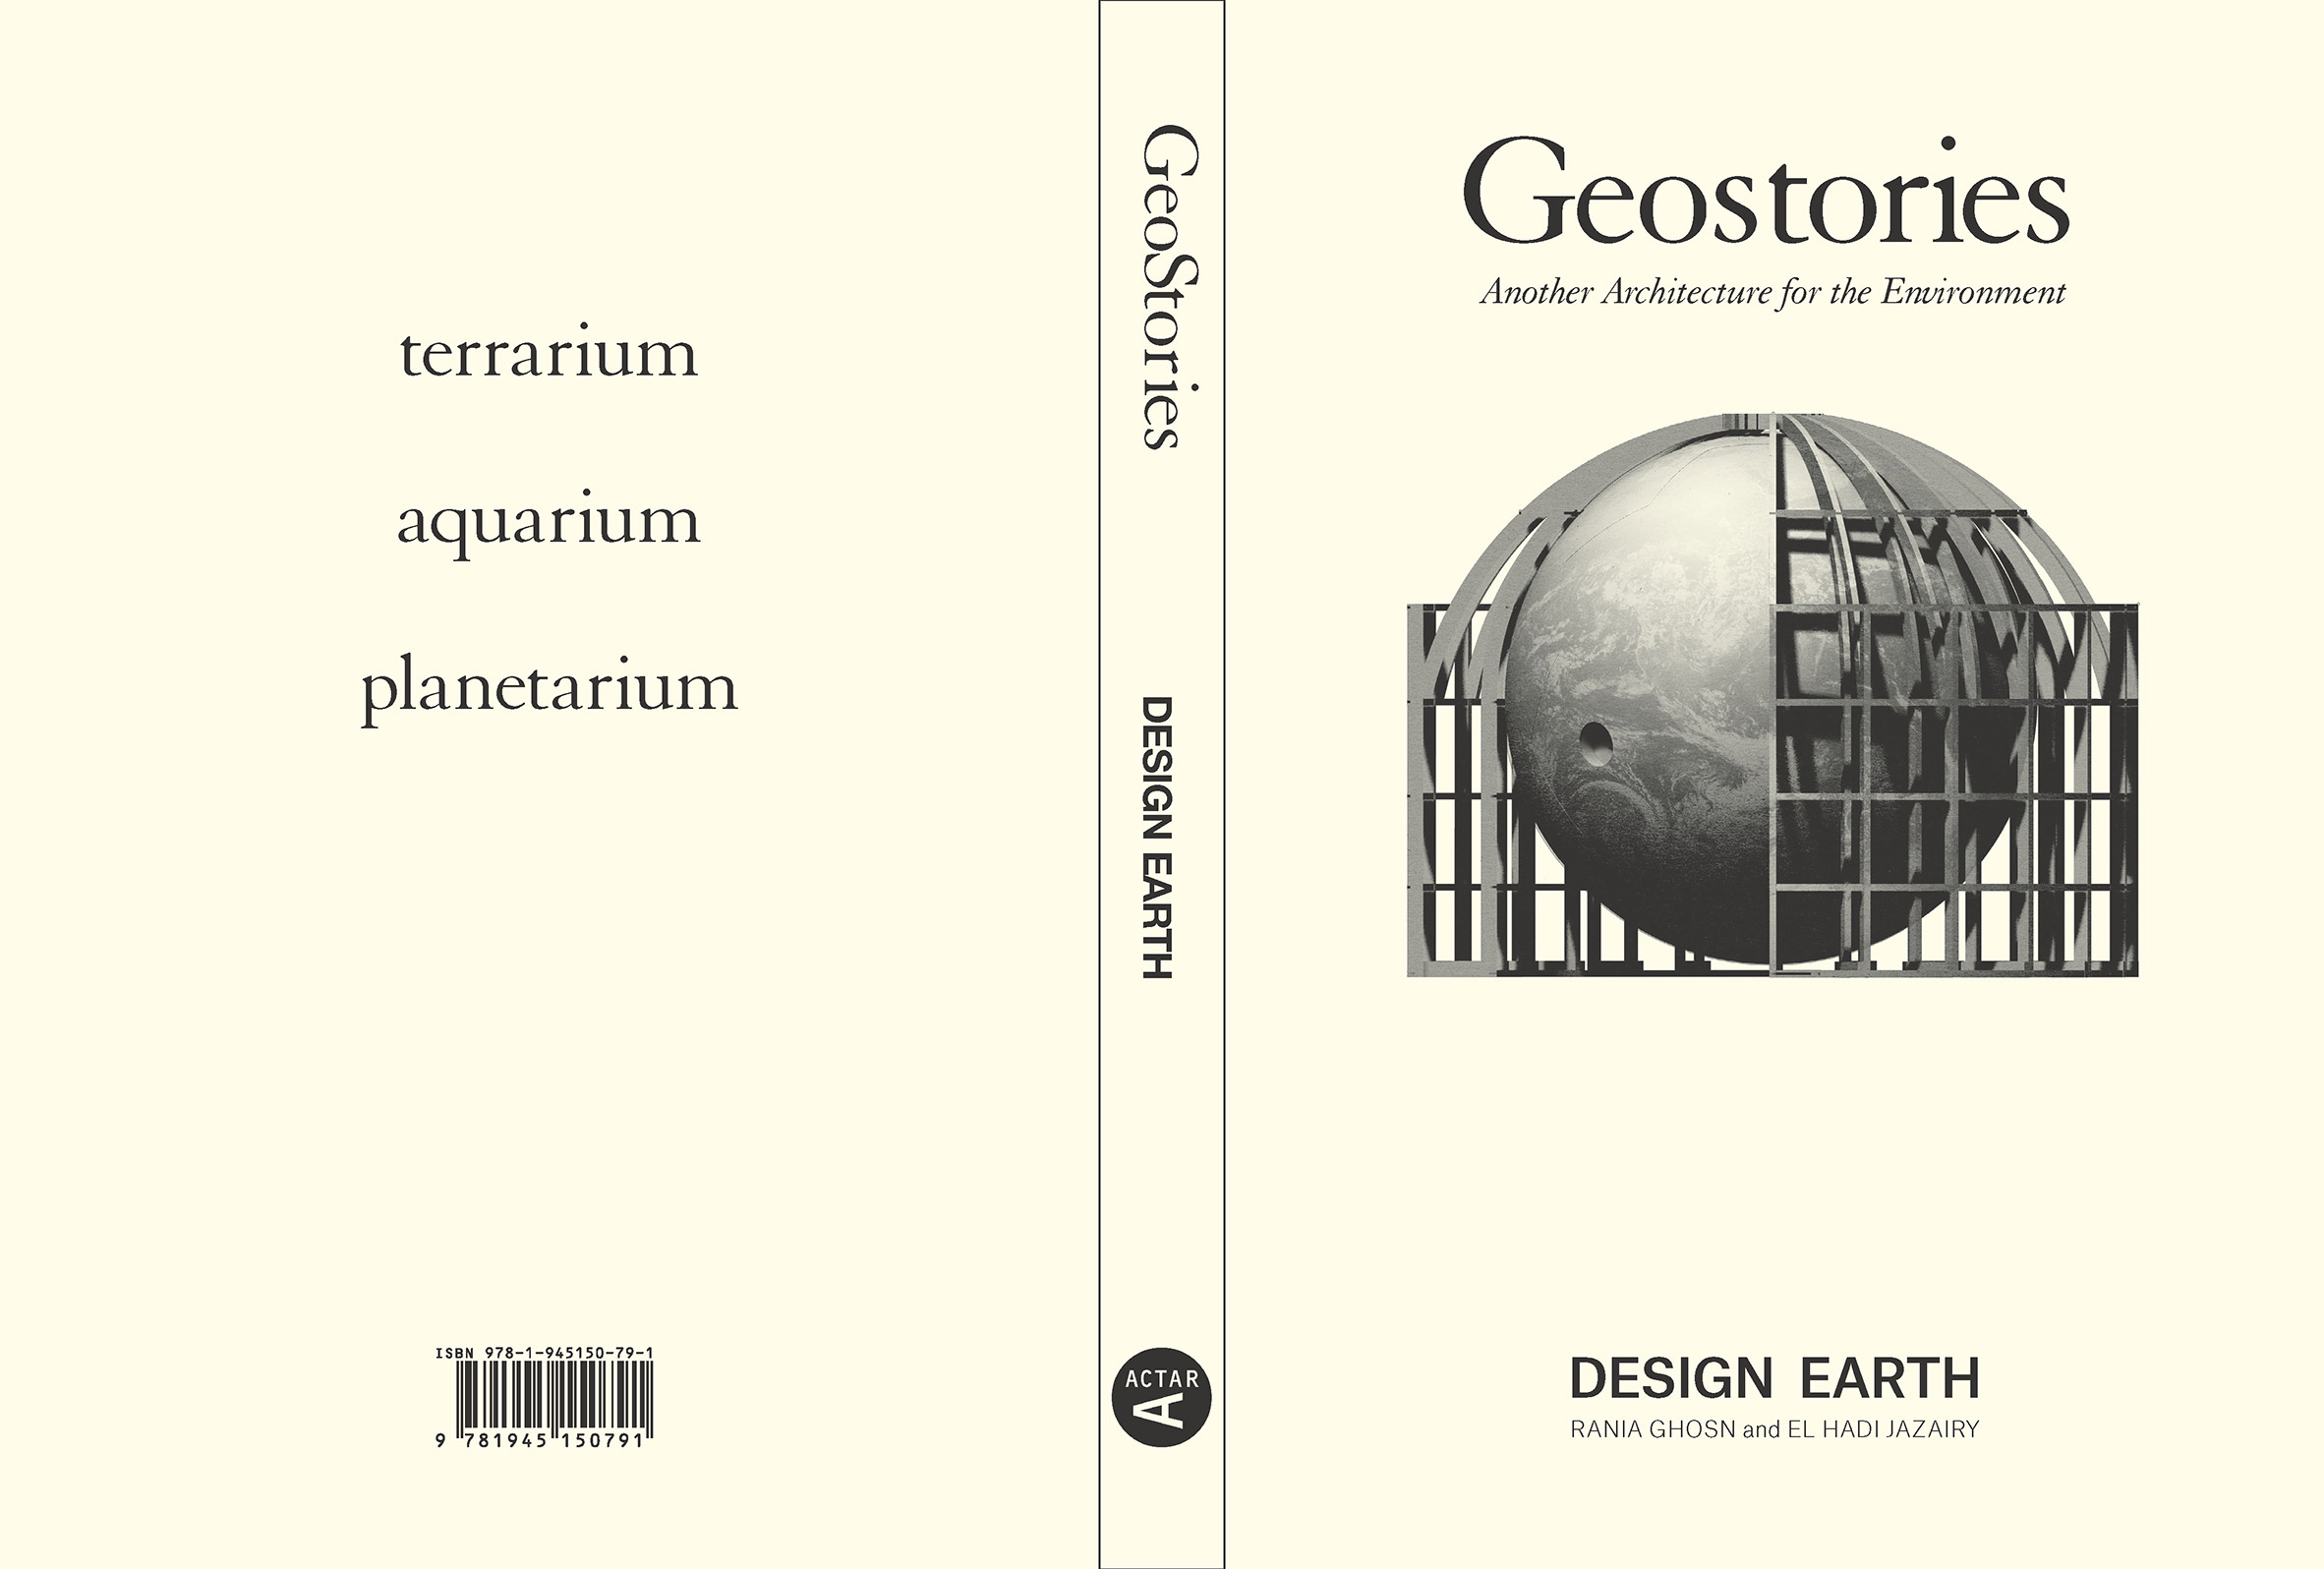 Design Earth, Geostories: Another Architecture for the Environment, 2018